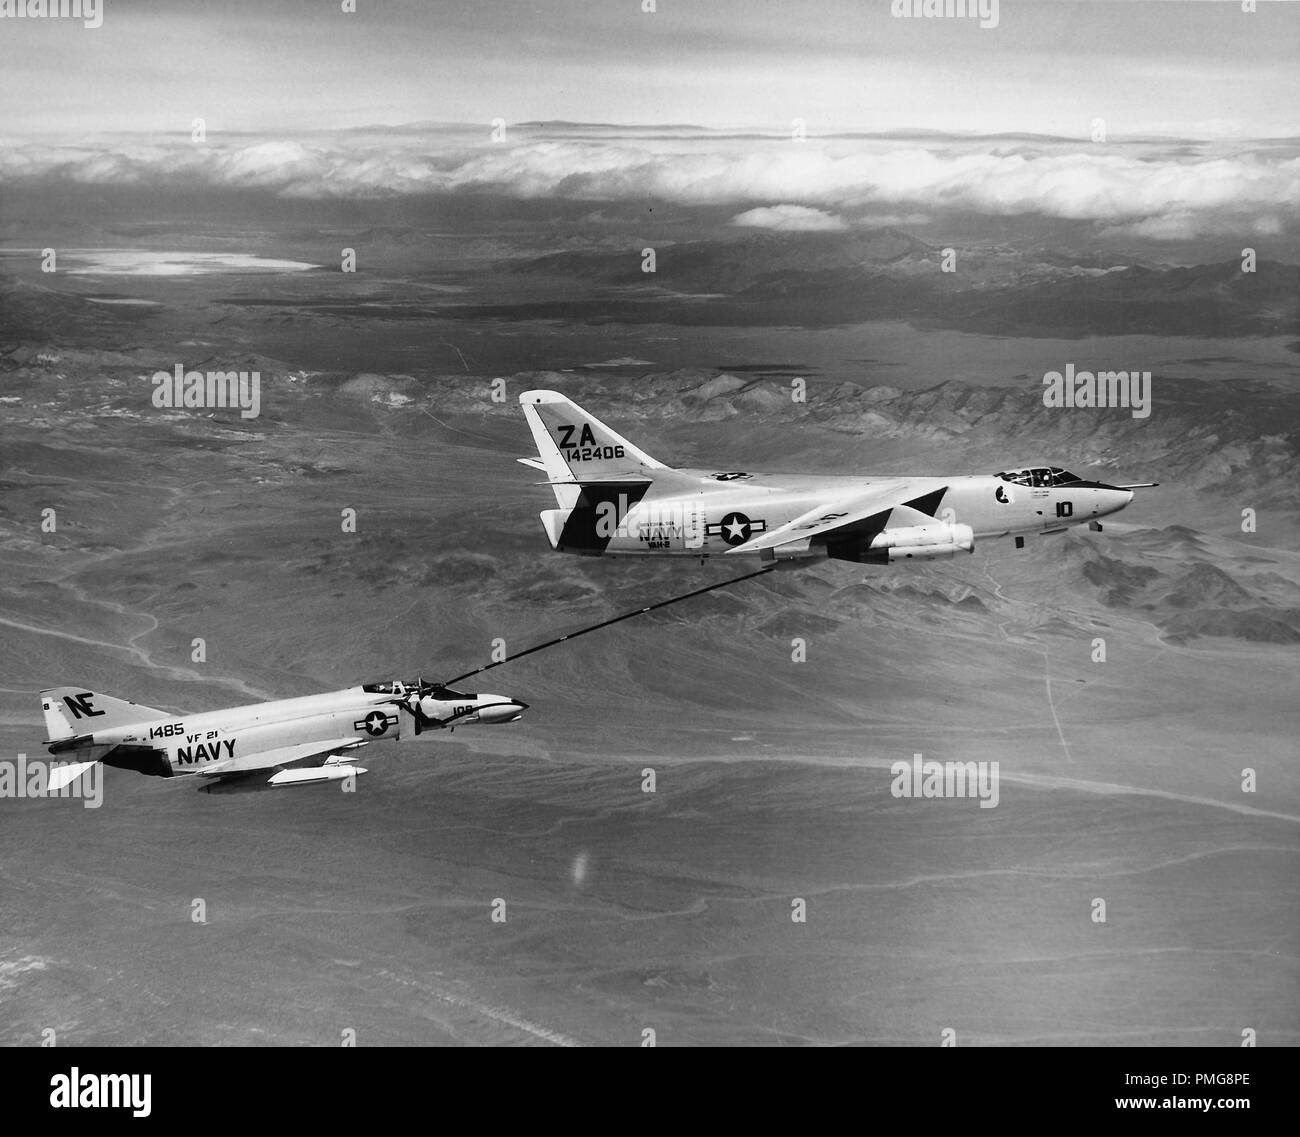 Black and white aerial photograph showing a pair of United States Navy aircraft, McDonnell Douglas F-4 Phantom IIs, refueling while in flight, with clouds and mountains in the distance, photographed during the Vietnam War, 1965. () Stock Photo